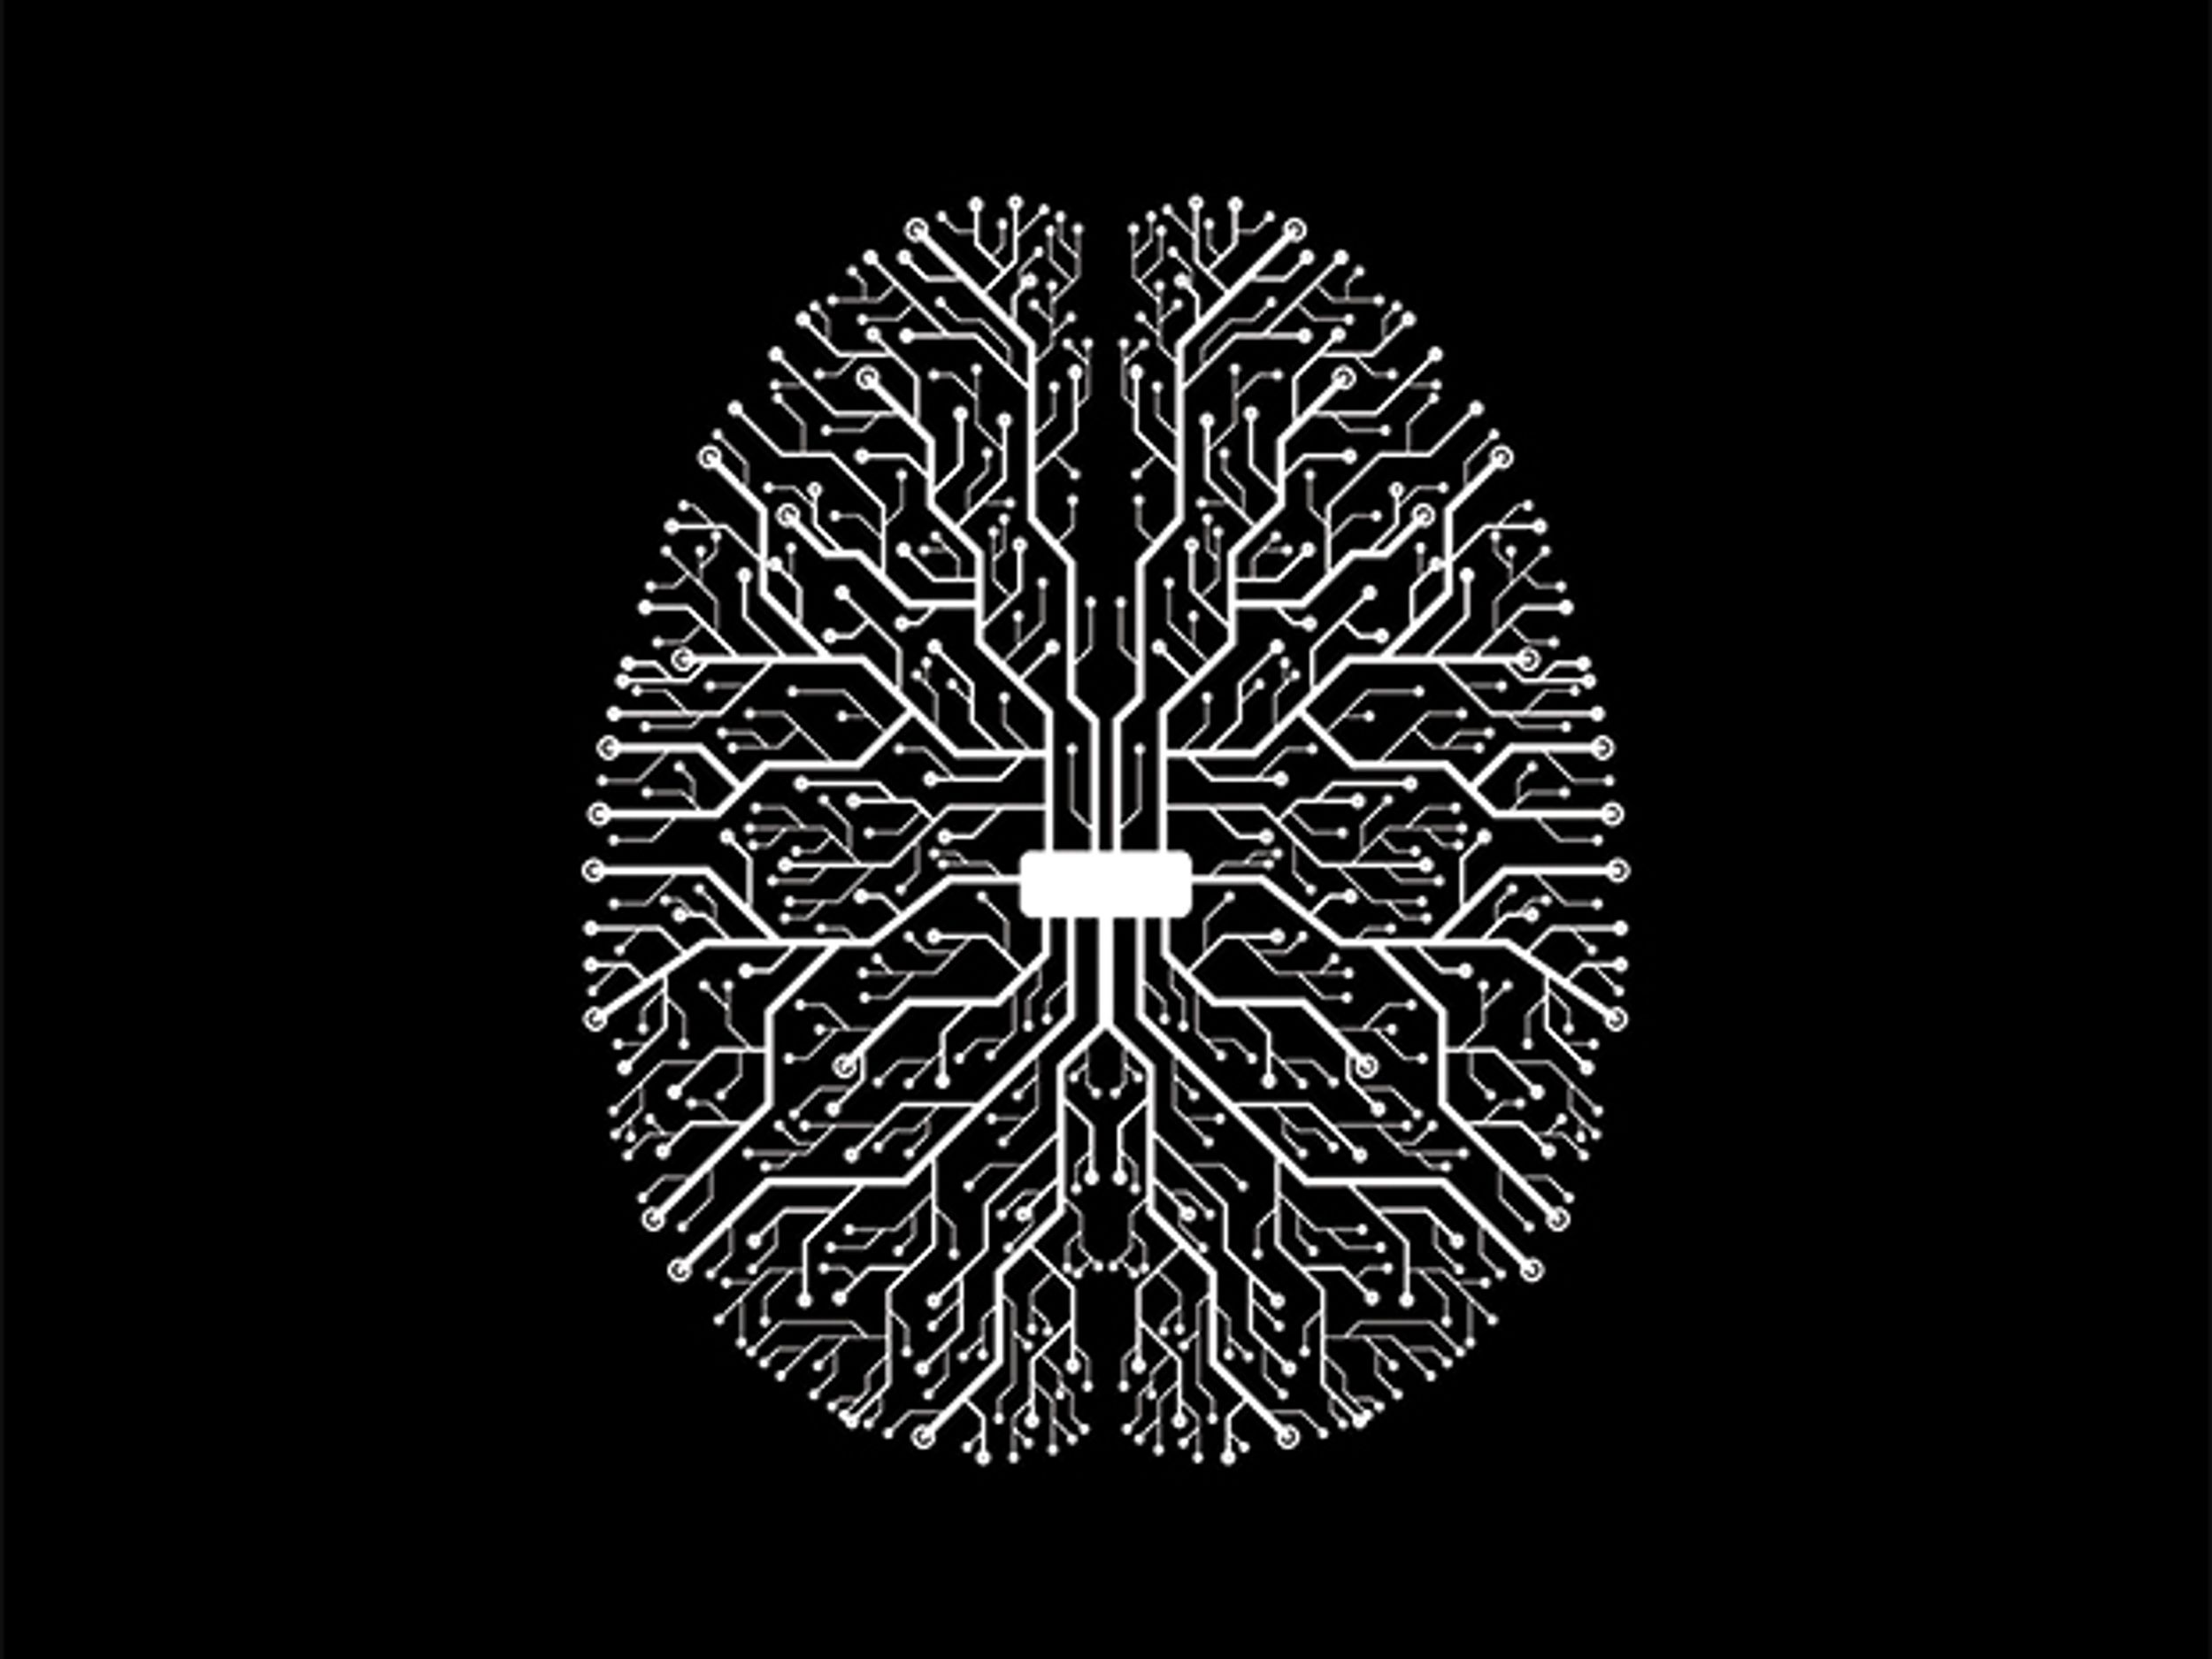 white lines connect to form the outline of a human brain on a black background